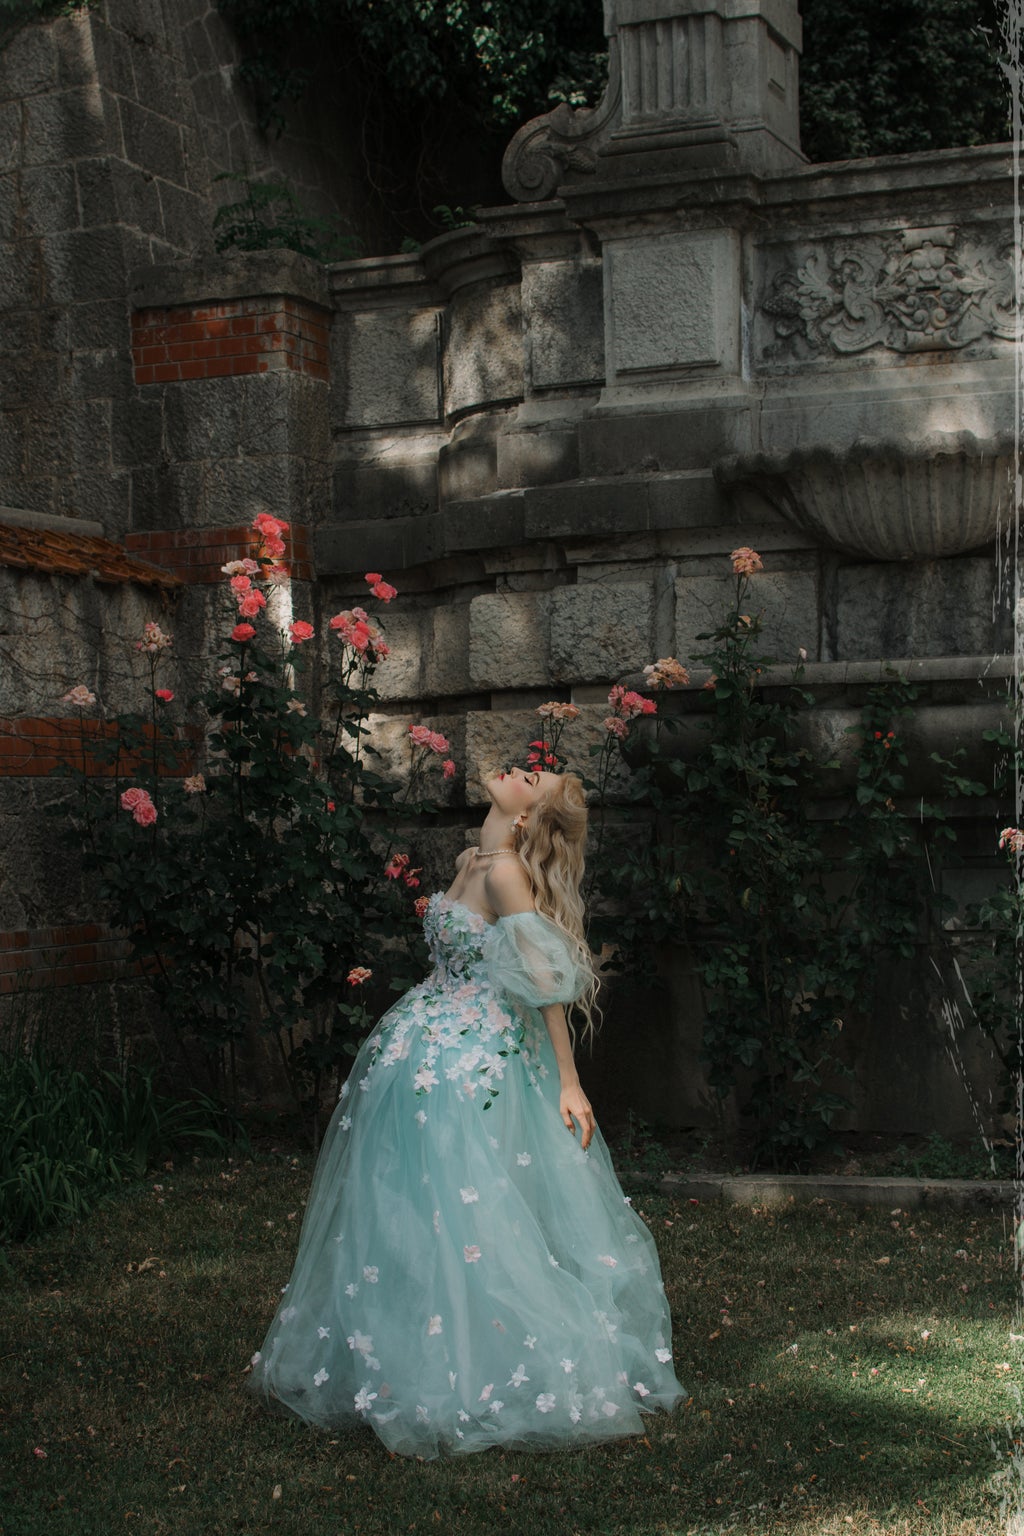 woman dressed like a princess in a garden